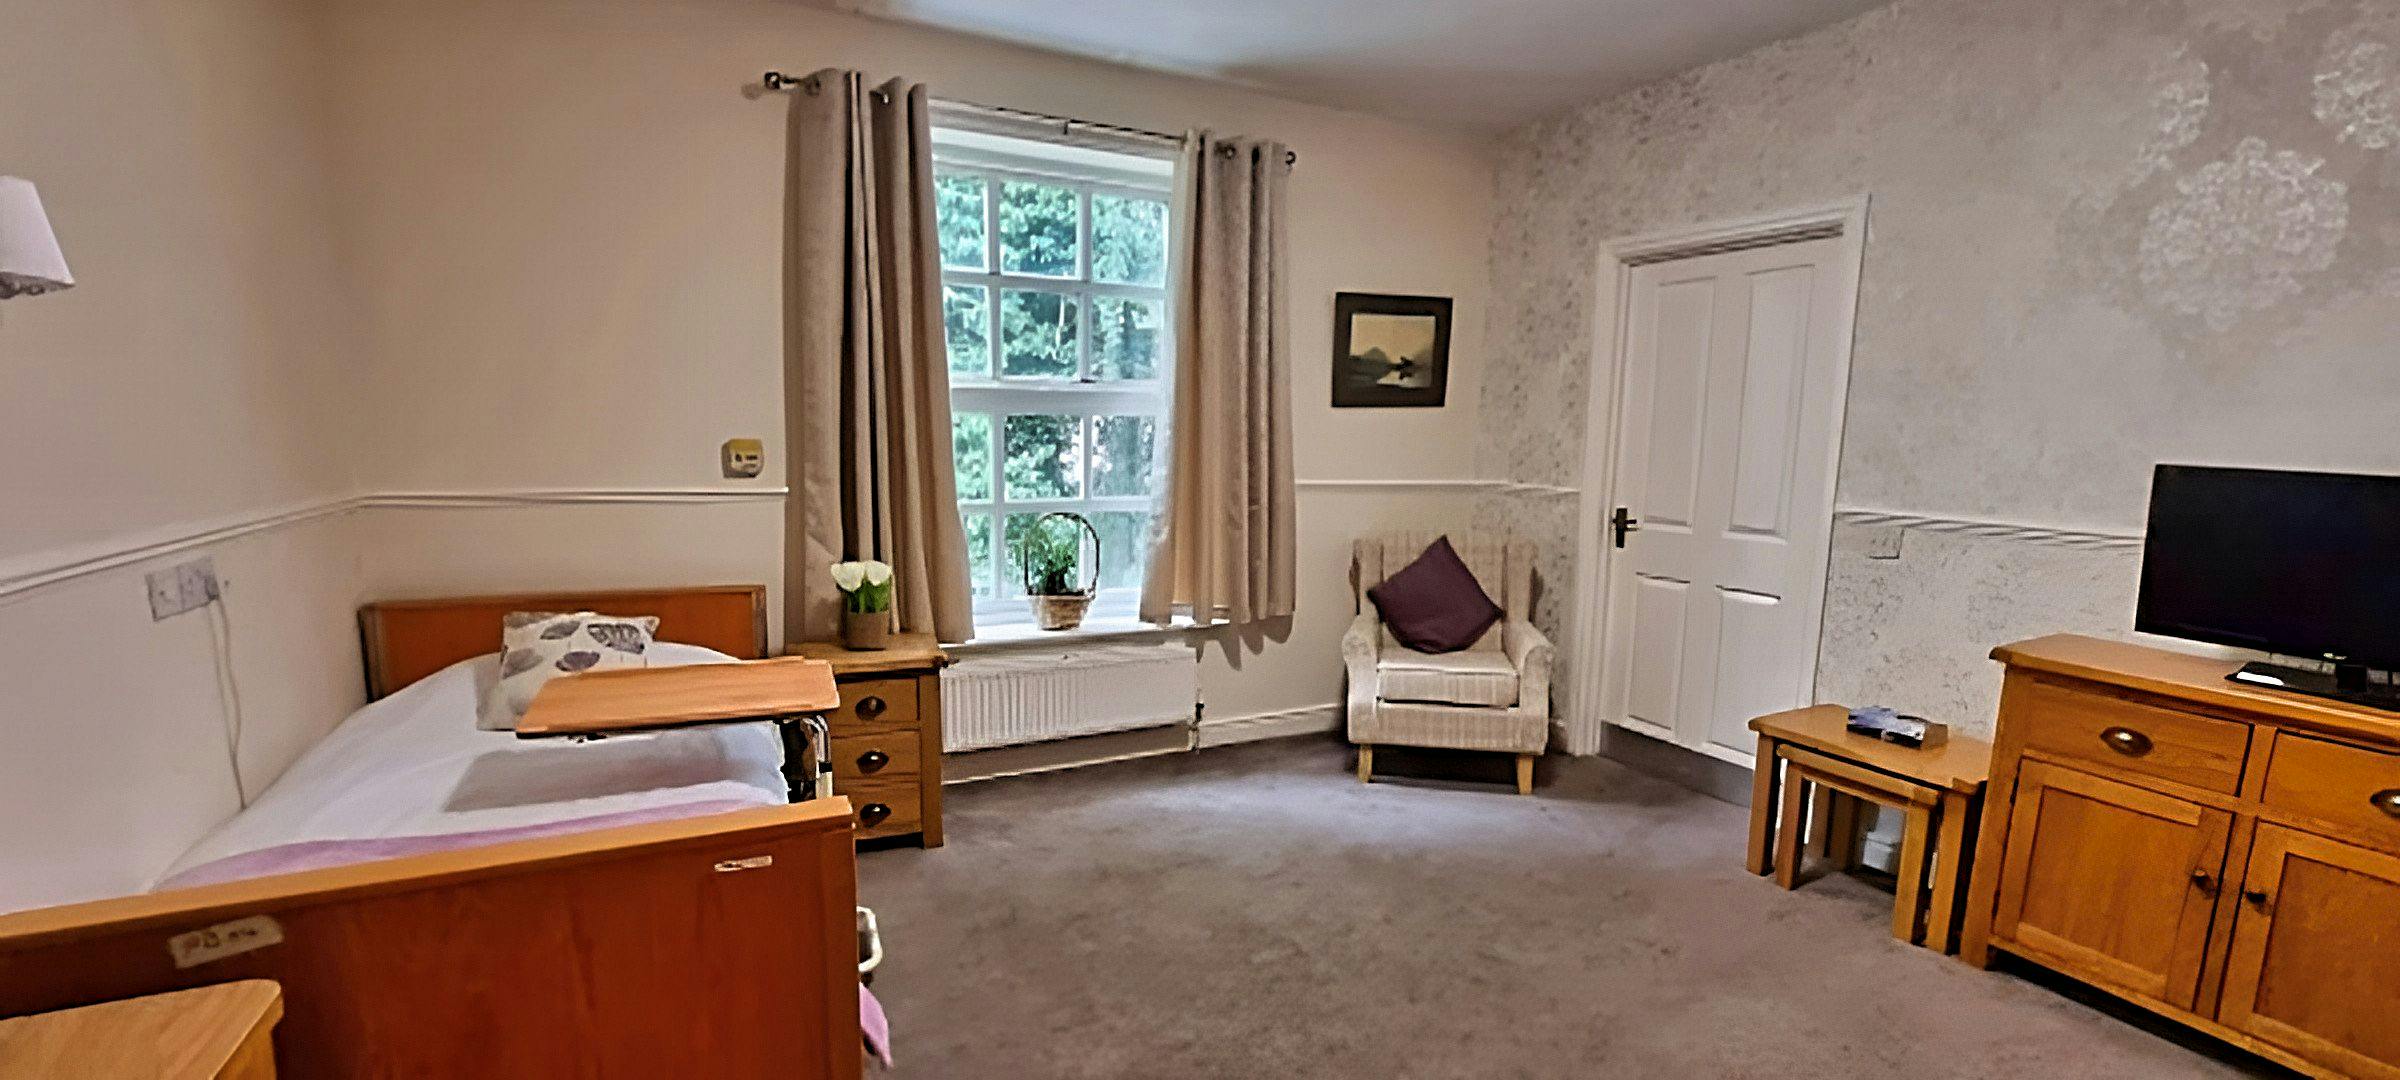 Harbour Healthcare - Kingswood Manor care home 2